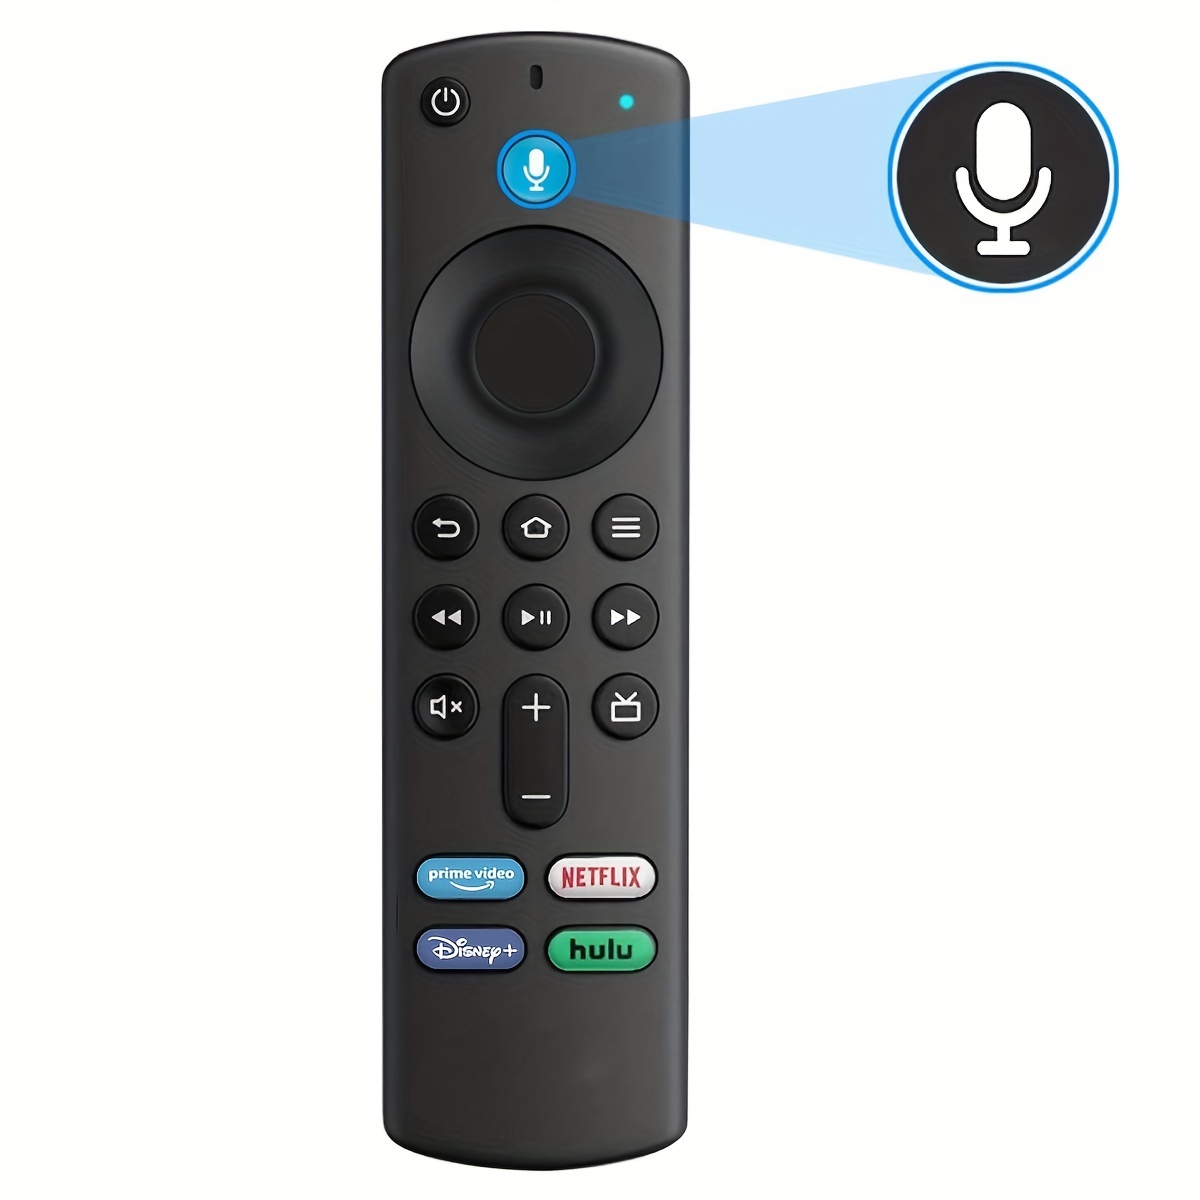  Replacement Voice Remote Control (2nd GEN) L5B83H with Power  and Volume Control fit for  2nd Gen TV Cube and TV Stick,1st Gen   TV Cube,  Stick 4K, and 3rd